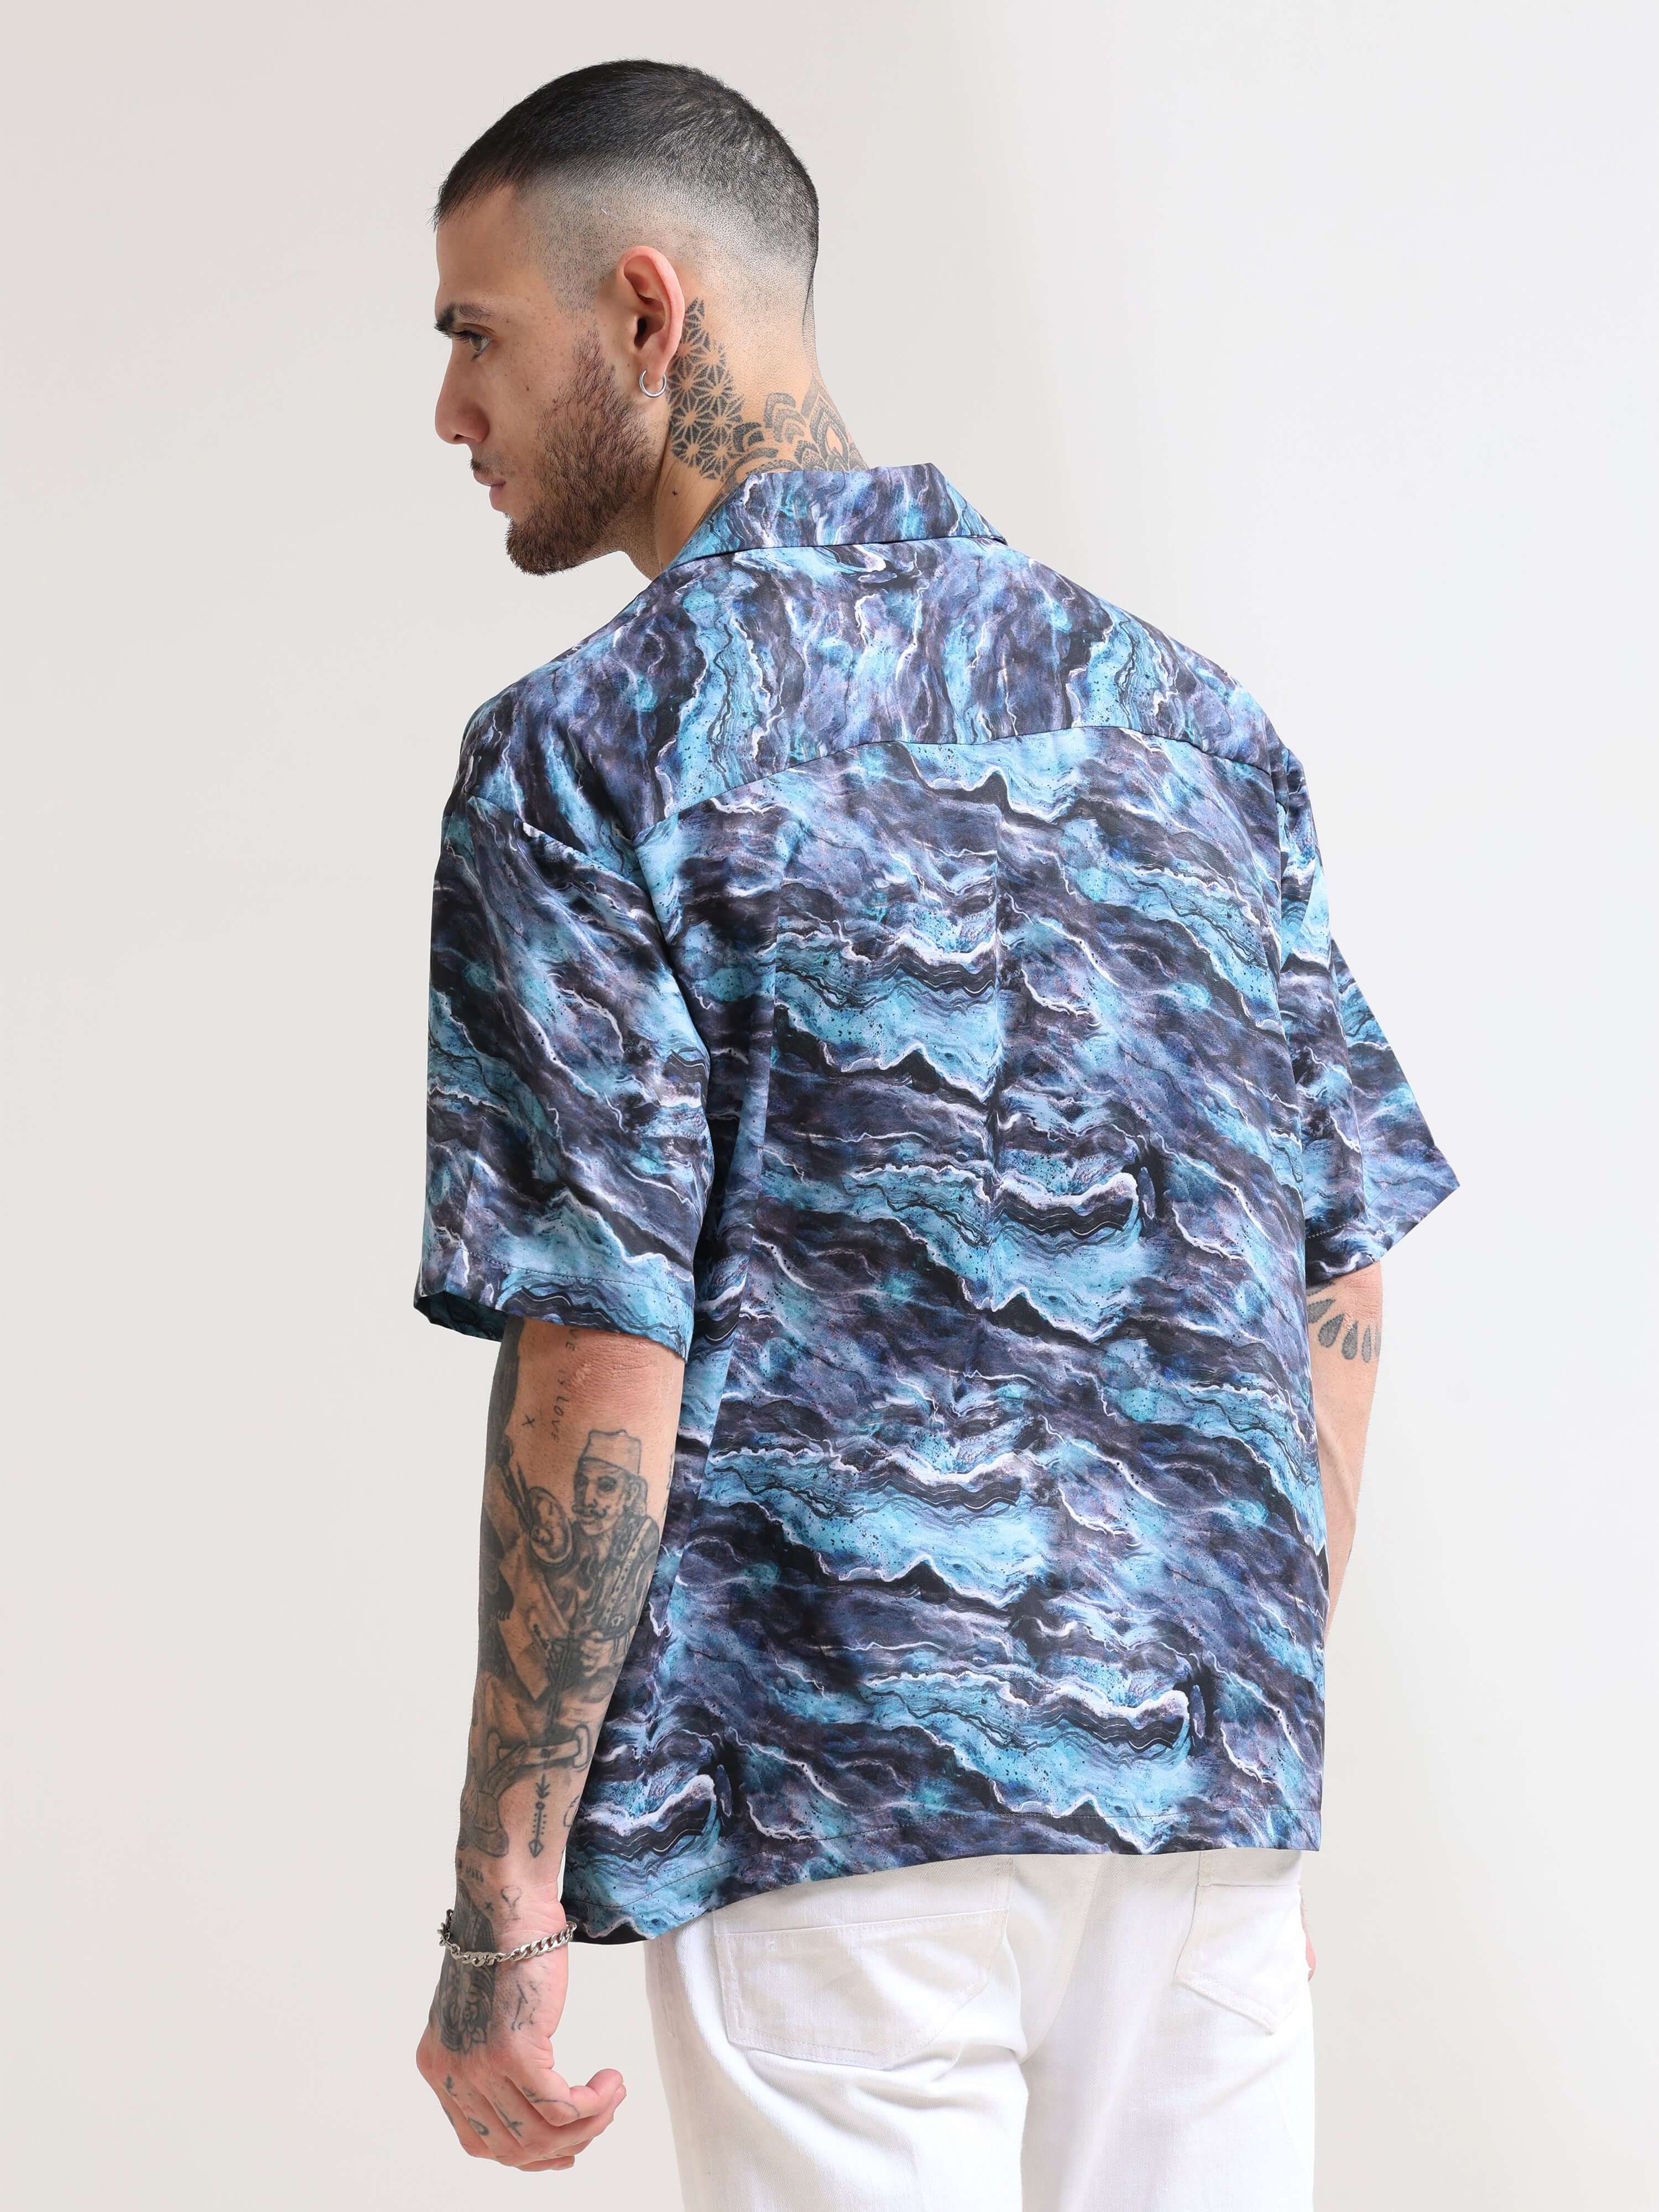 Attico Blue Oversized Shirt shop online at Estilocus. Our Attico Blue Oversized Shirt is perfect for those Hawaiian days. The relaxed fit and lightweight fabric make it comfortable to wear all day. Its classic style is perfect for those summer streetwear